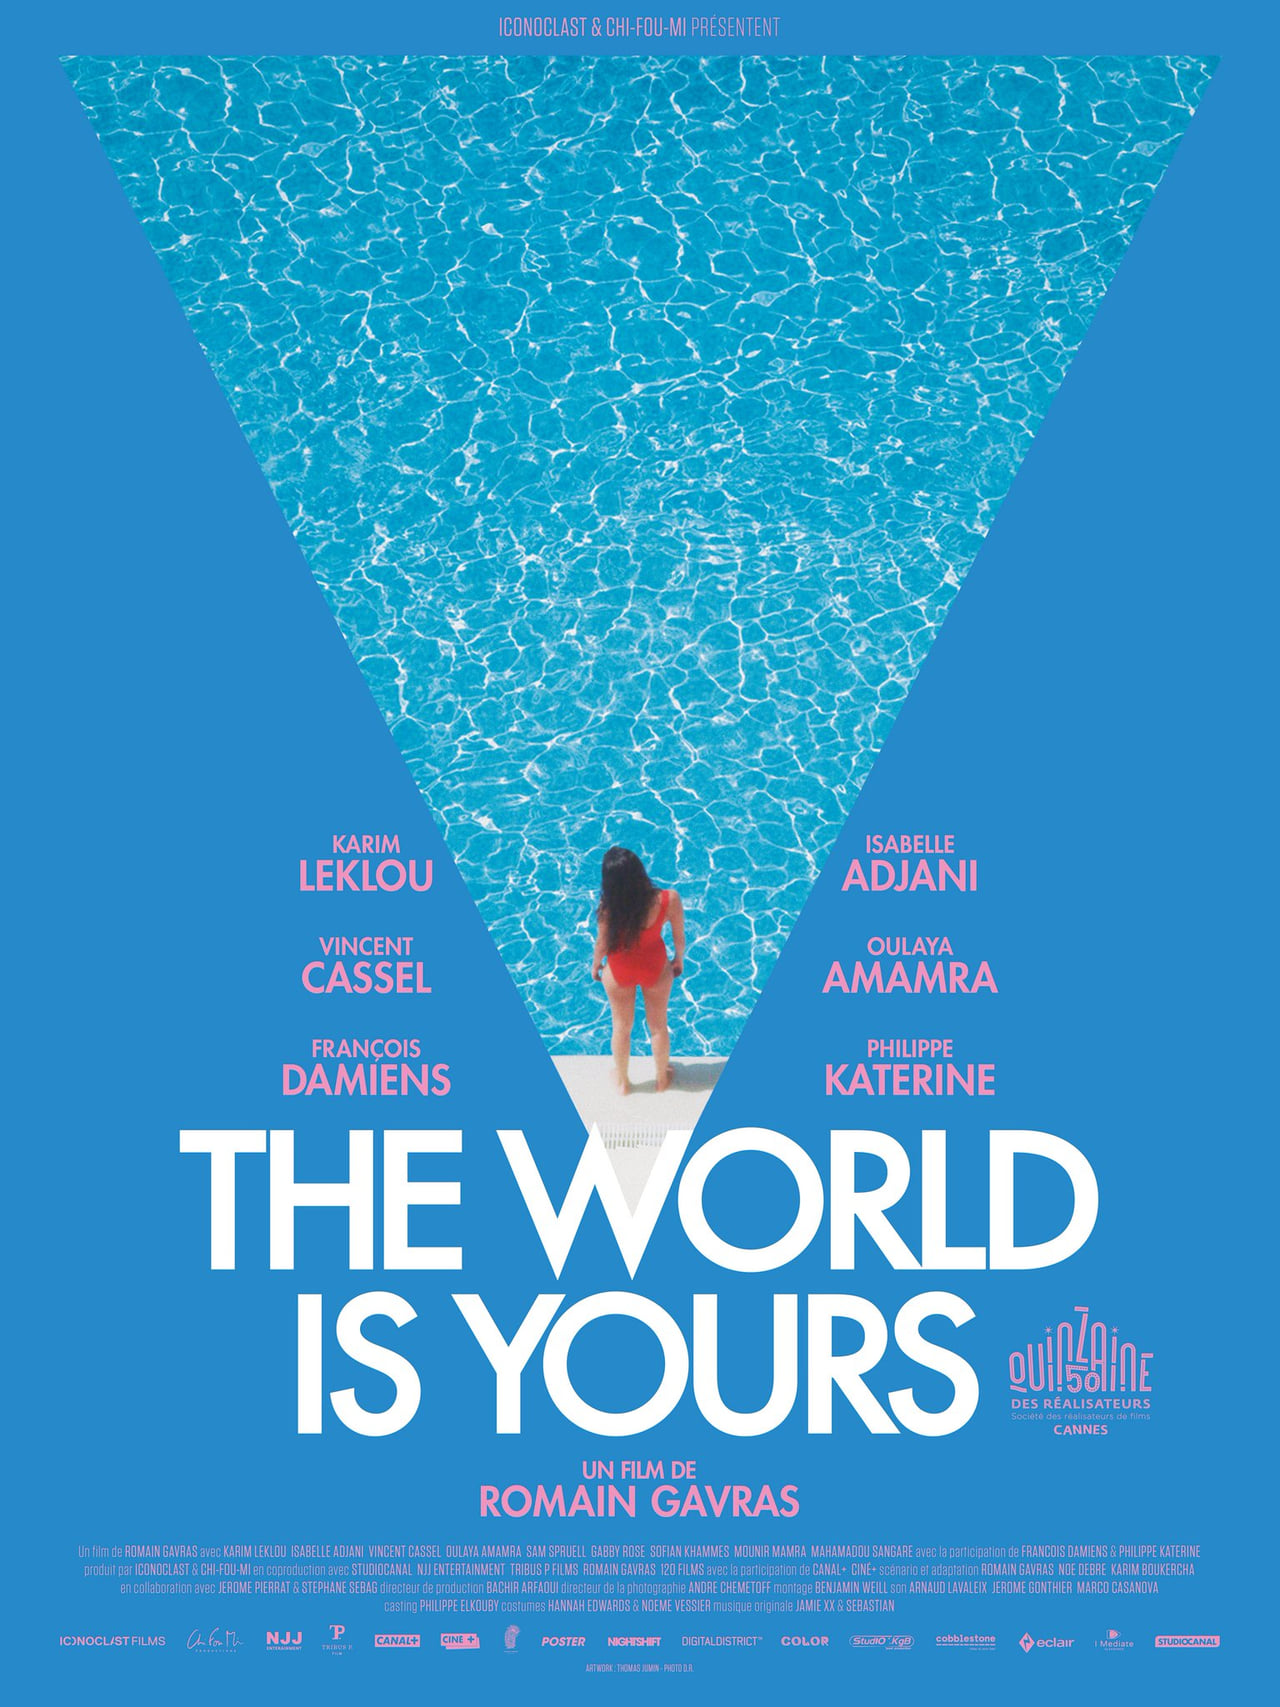 The World Is Yours (2018) 640Kbps 24Fps 48Khz 5.1Ch DD+ NF E-AC3 Turkish Audio TAC